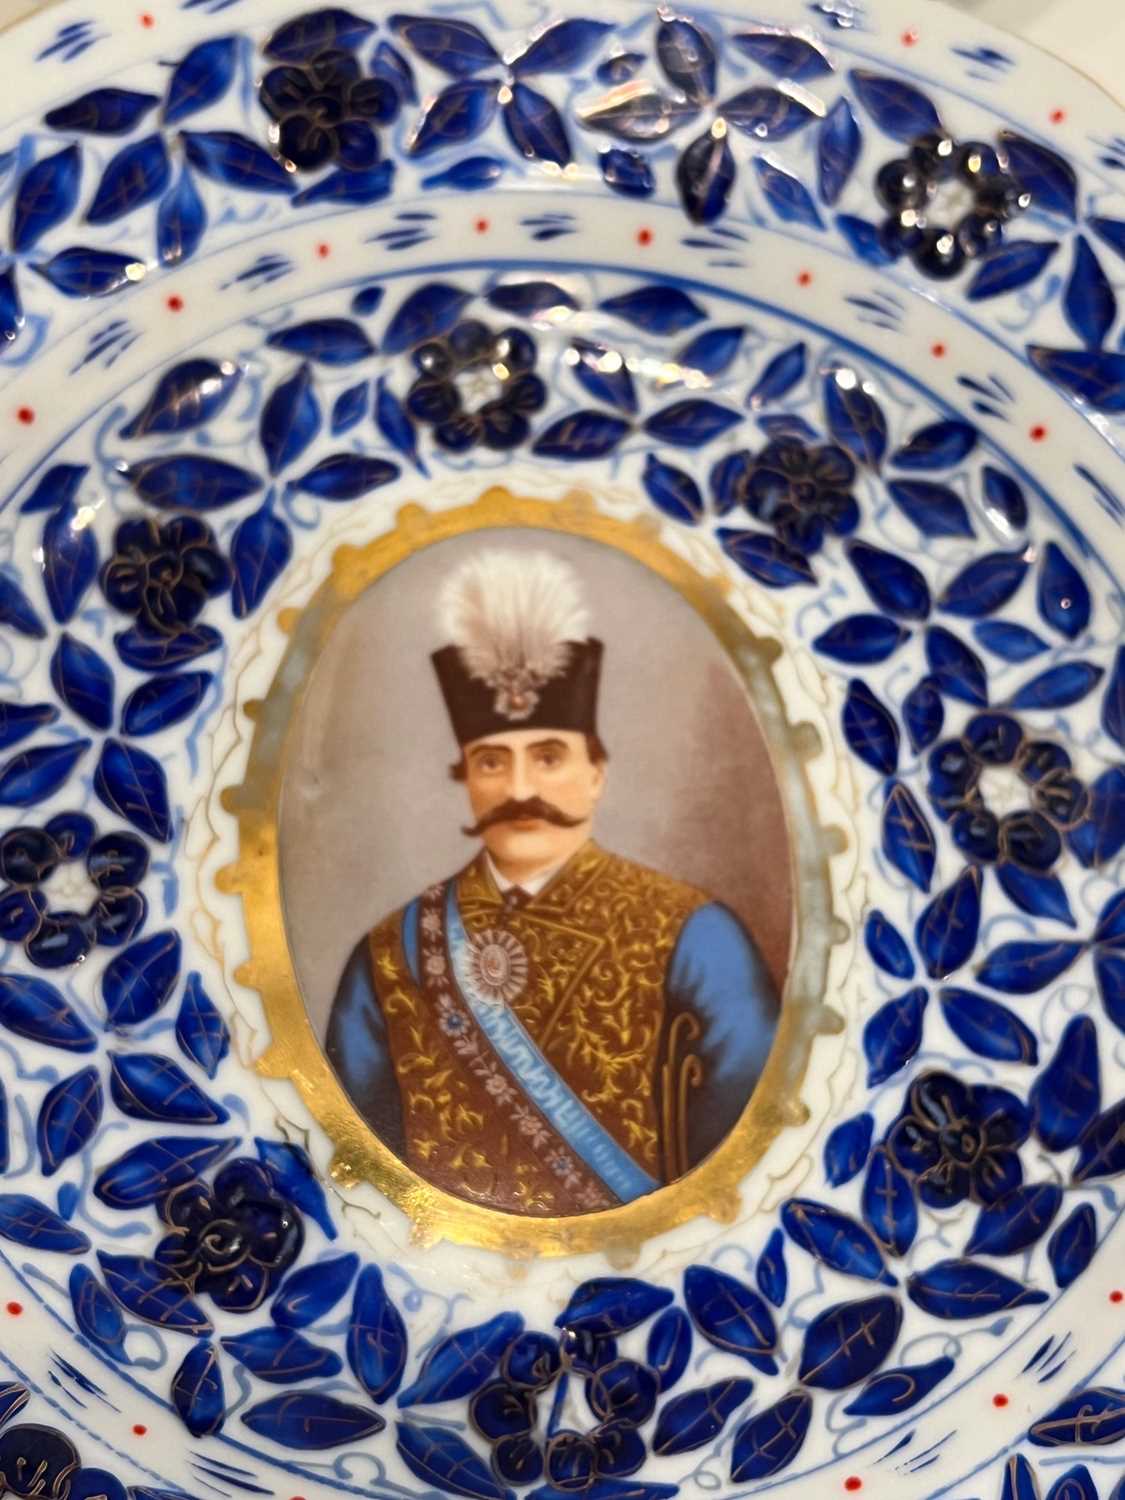 A SET OF EIGHT RUSSIAN PORCELAIN BOWLS AND DISHES MADE FOR THE PERSIAN MARKET - Image 2 of 3